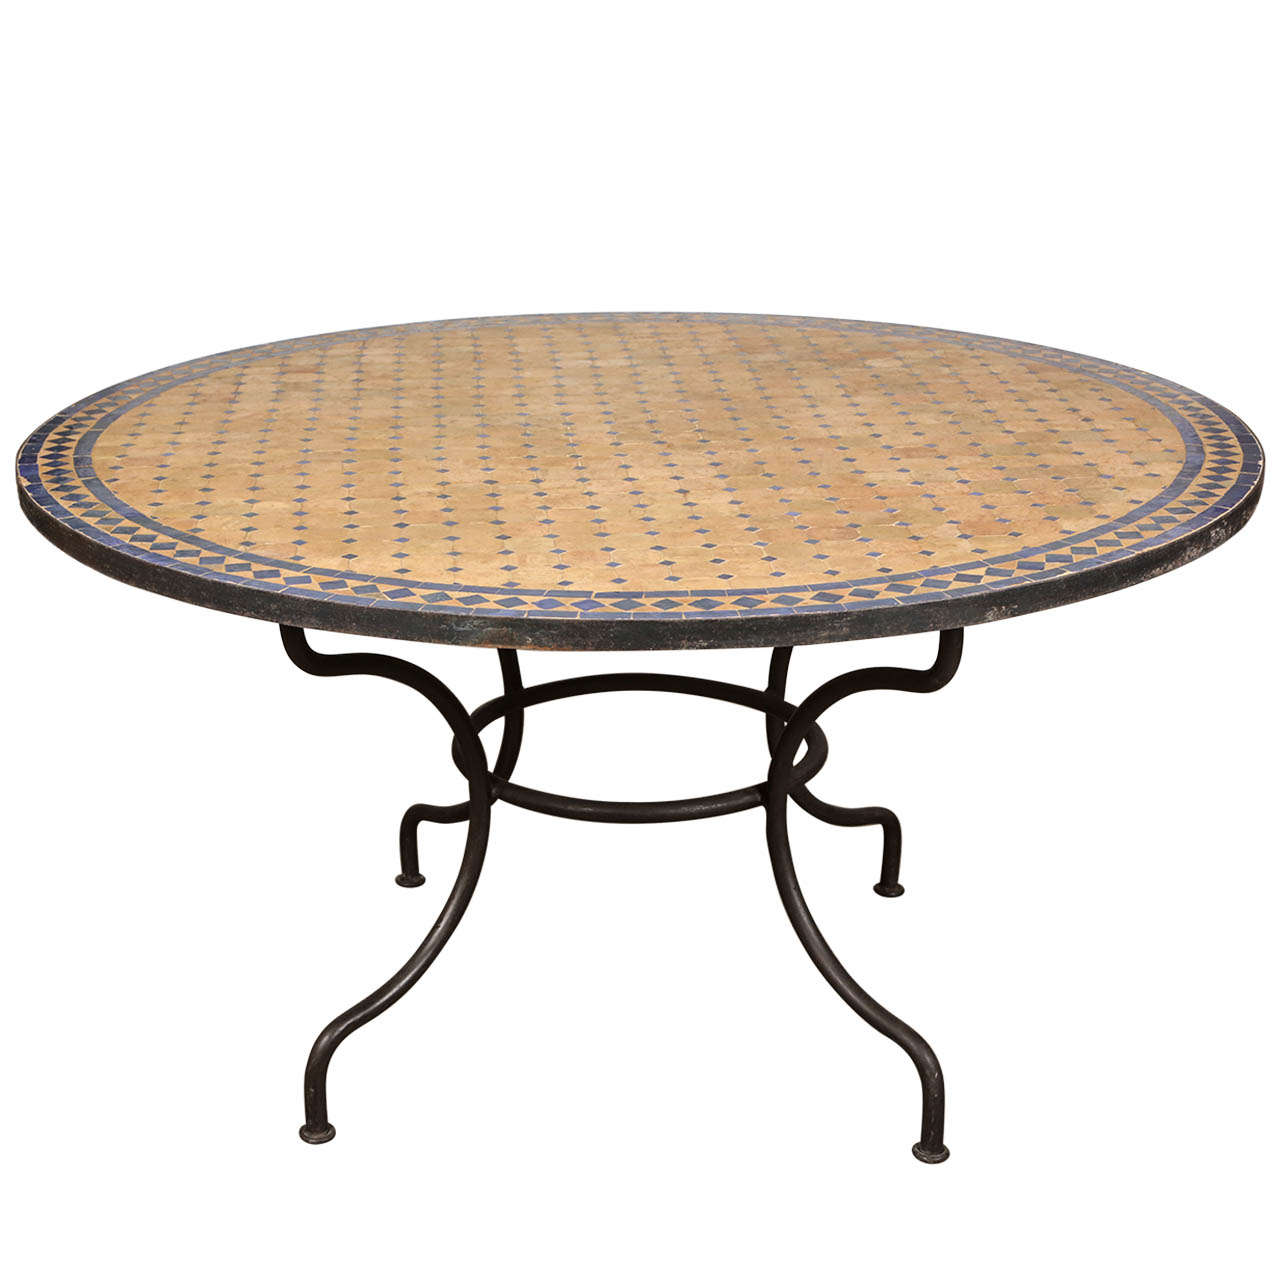 Outdoor Mosaic Tile Table